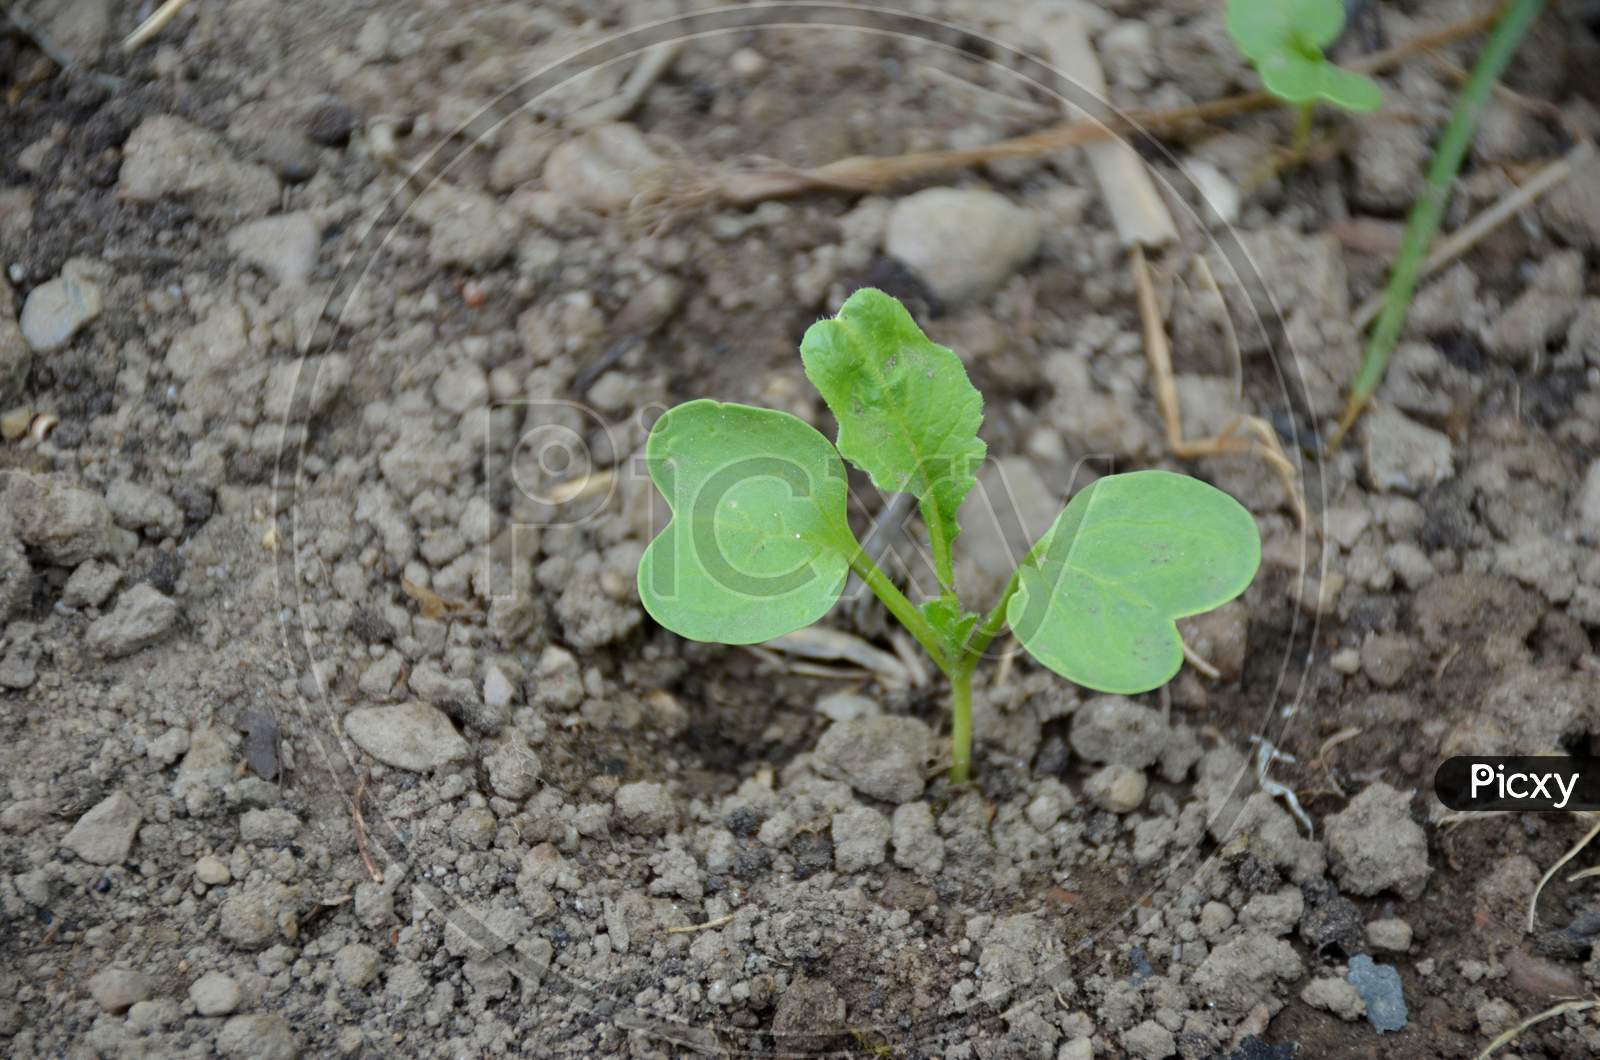 The Small Ripe Green Spinach Plant Seedlings In The Garden.